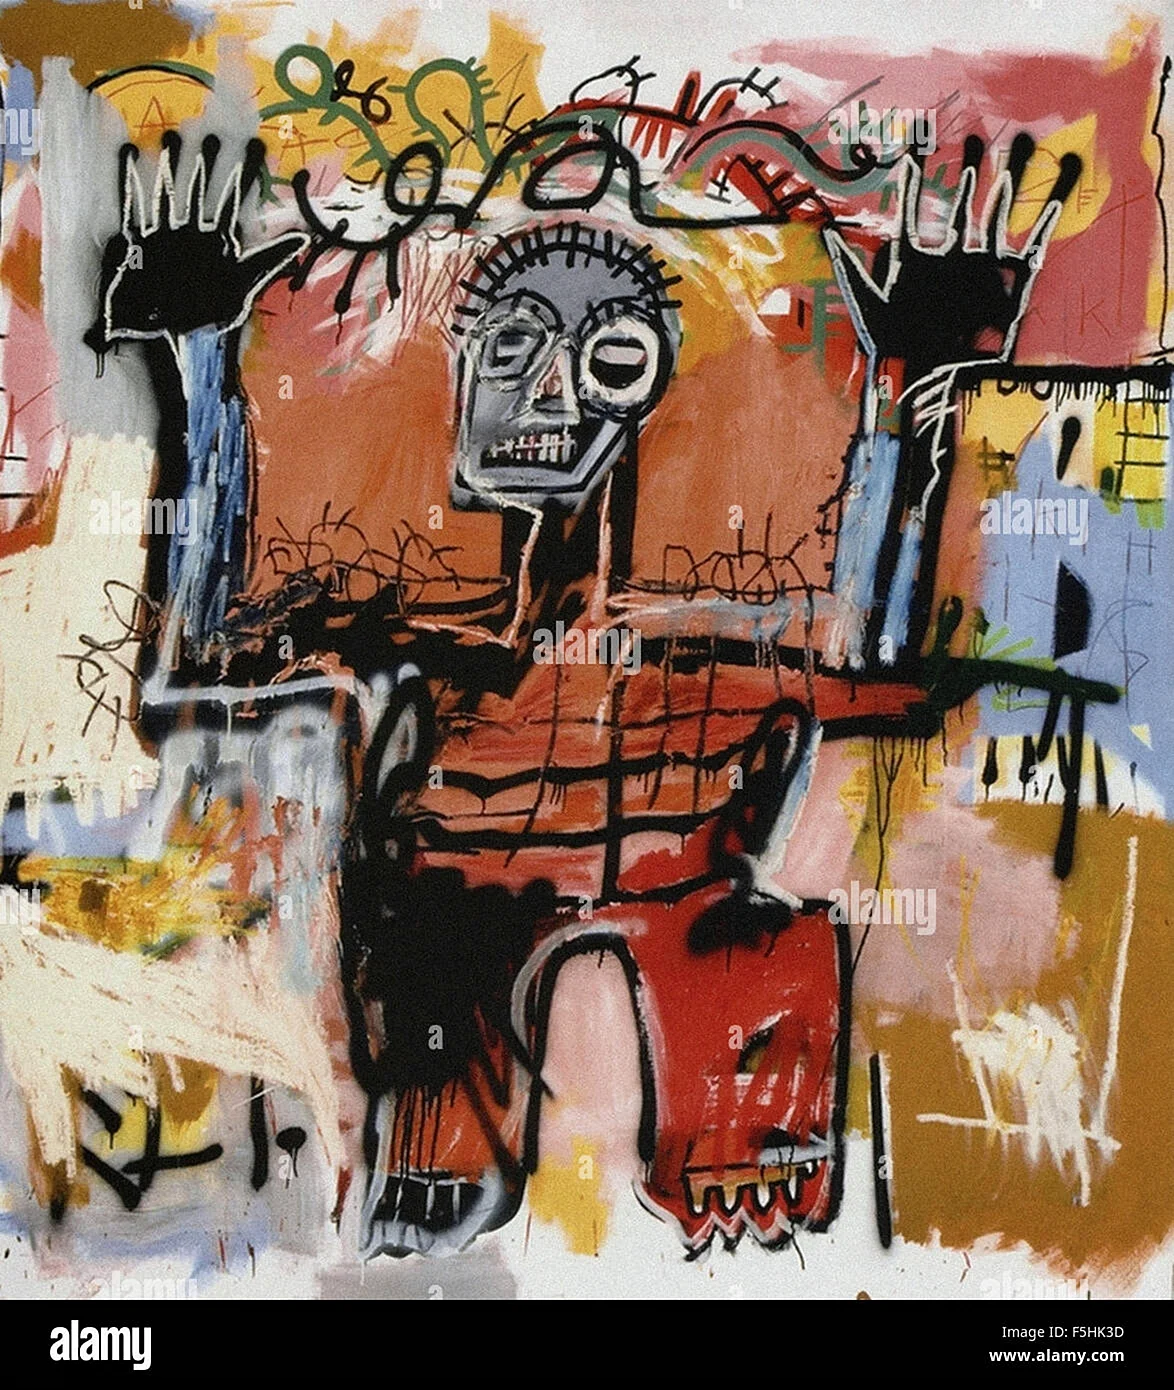 Jean-Michel Basquiat Untitled Wallpaper For iPhone